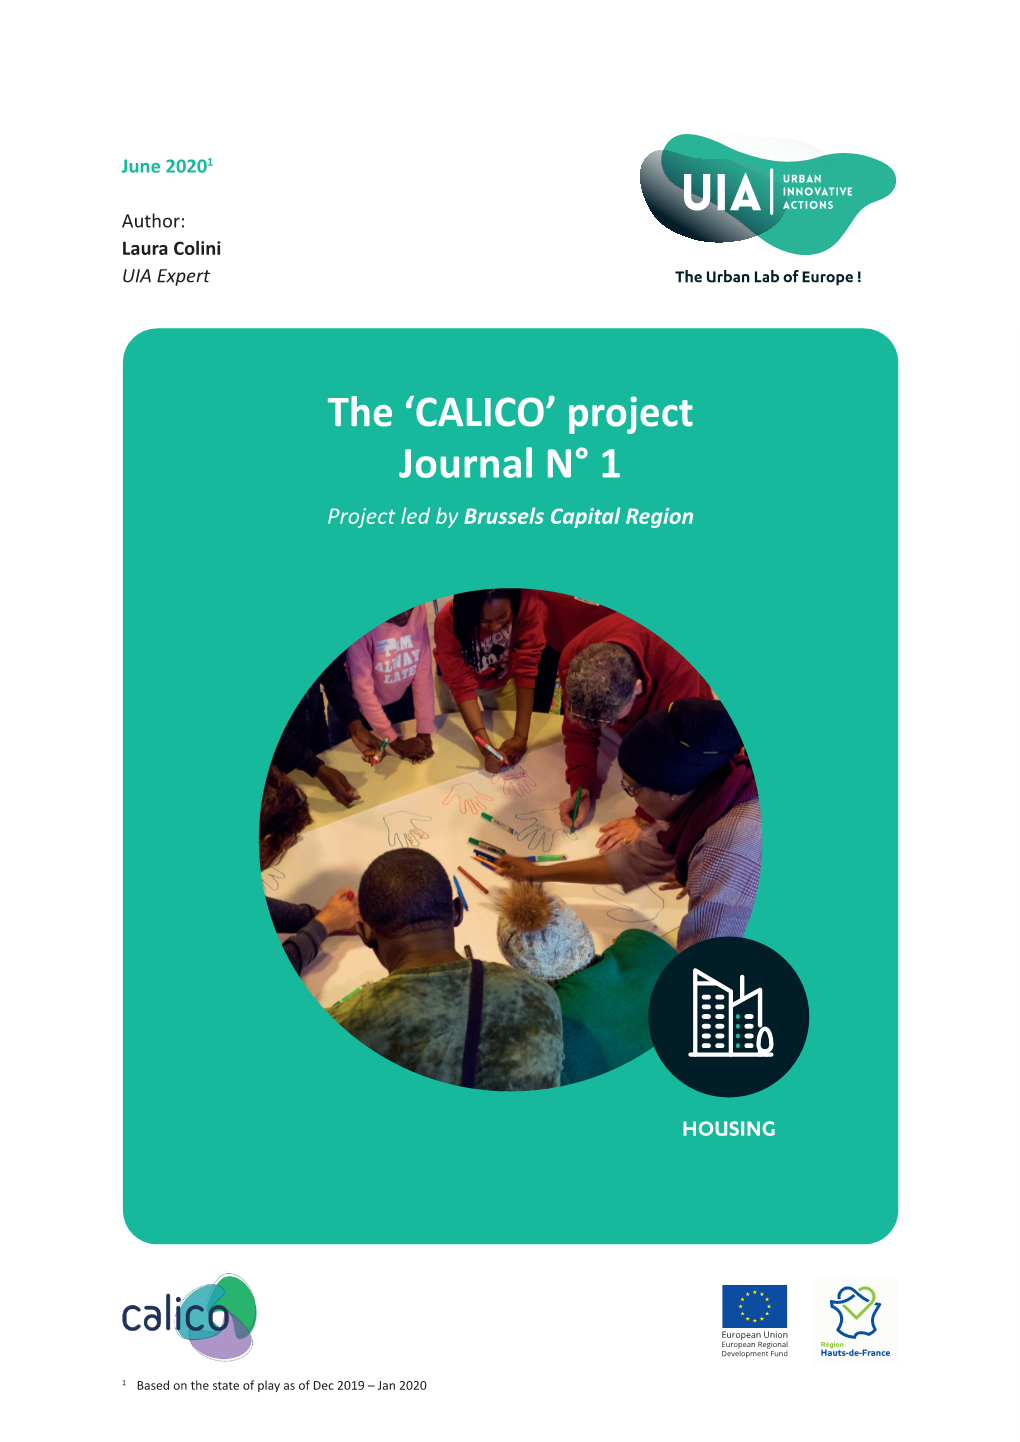 CALICO’ Project Journal N° 1 Project Led by Brussels Capital Region